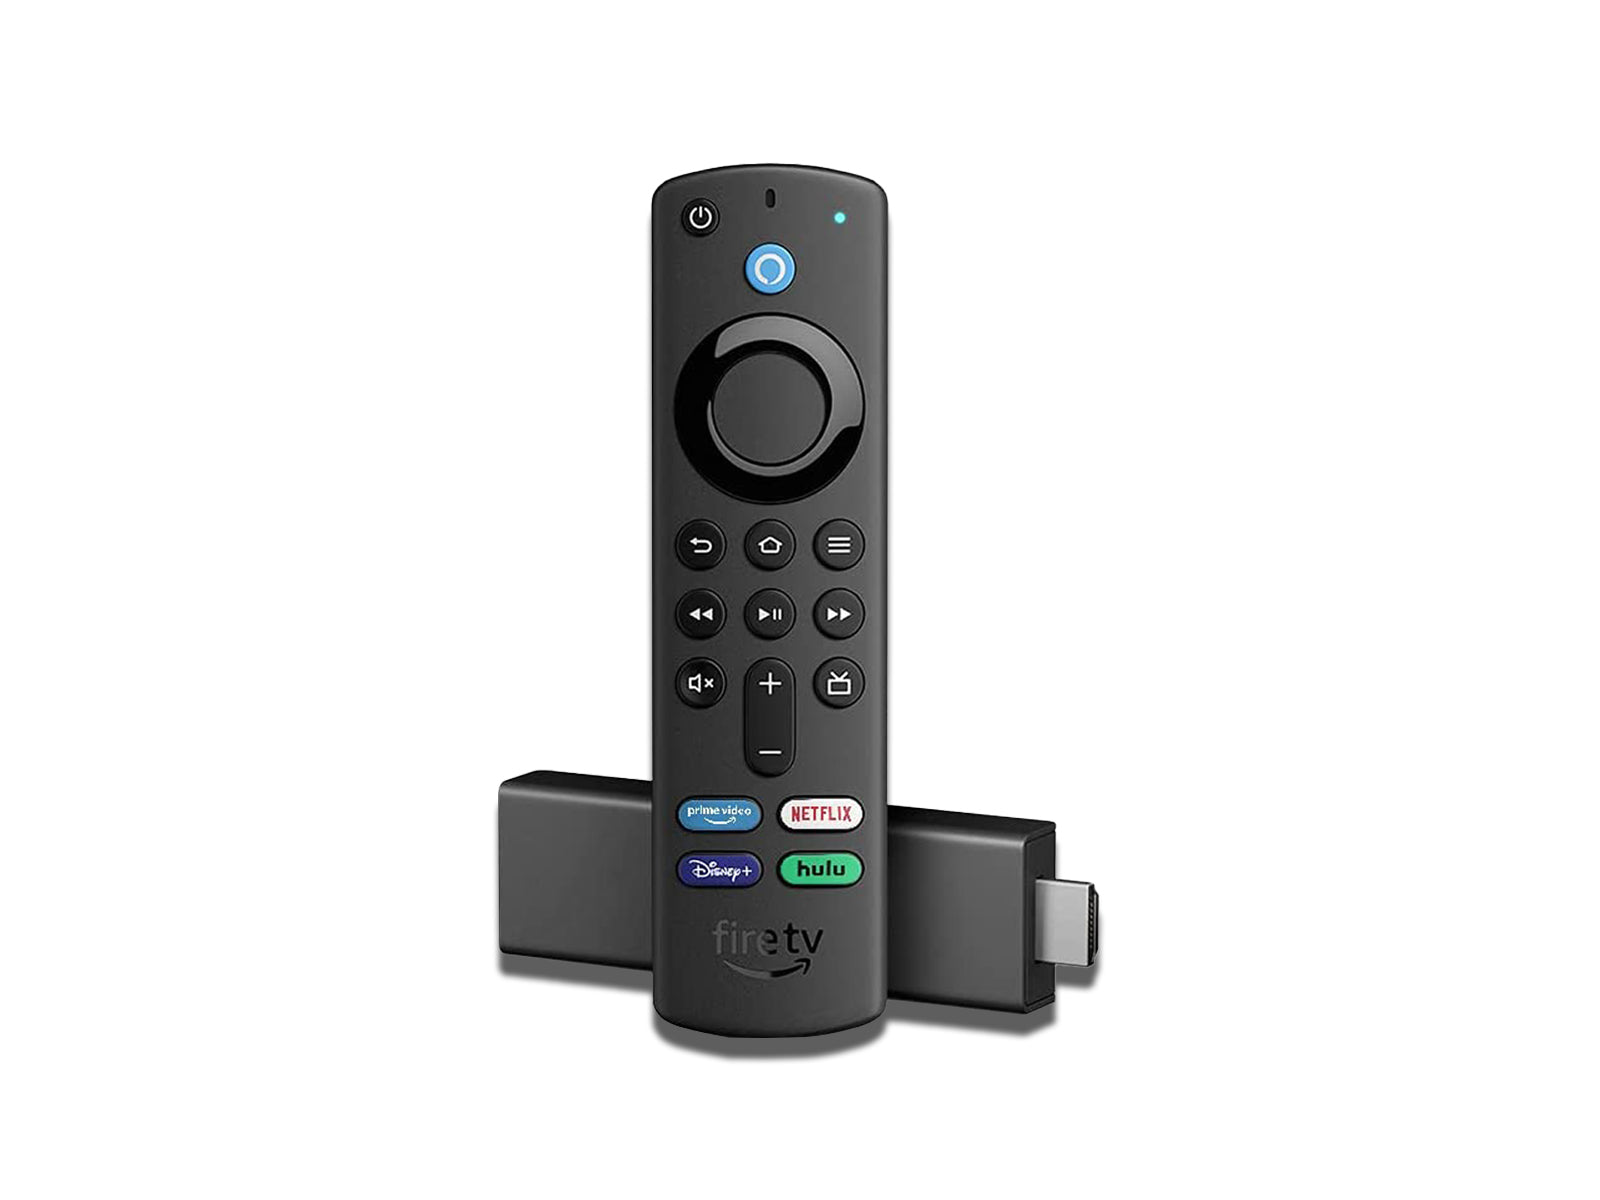 Image Showing Amazon Firestick With Remote Control on The White Background